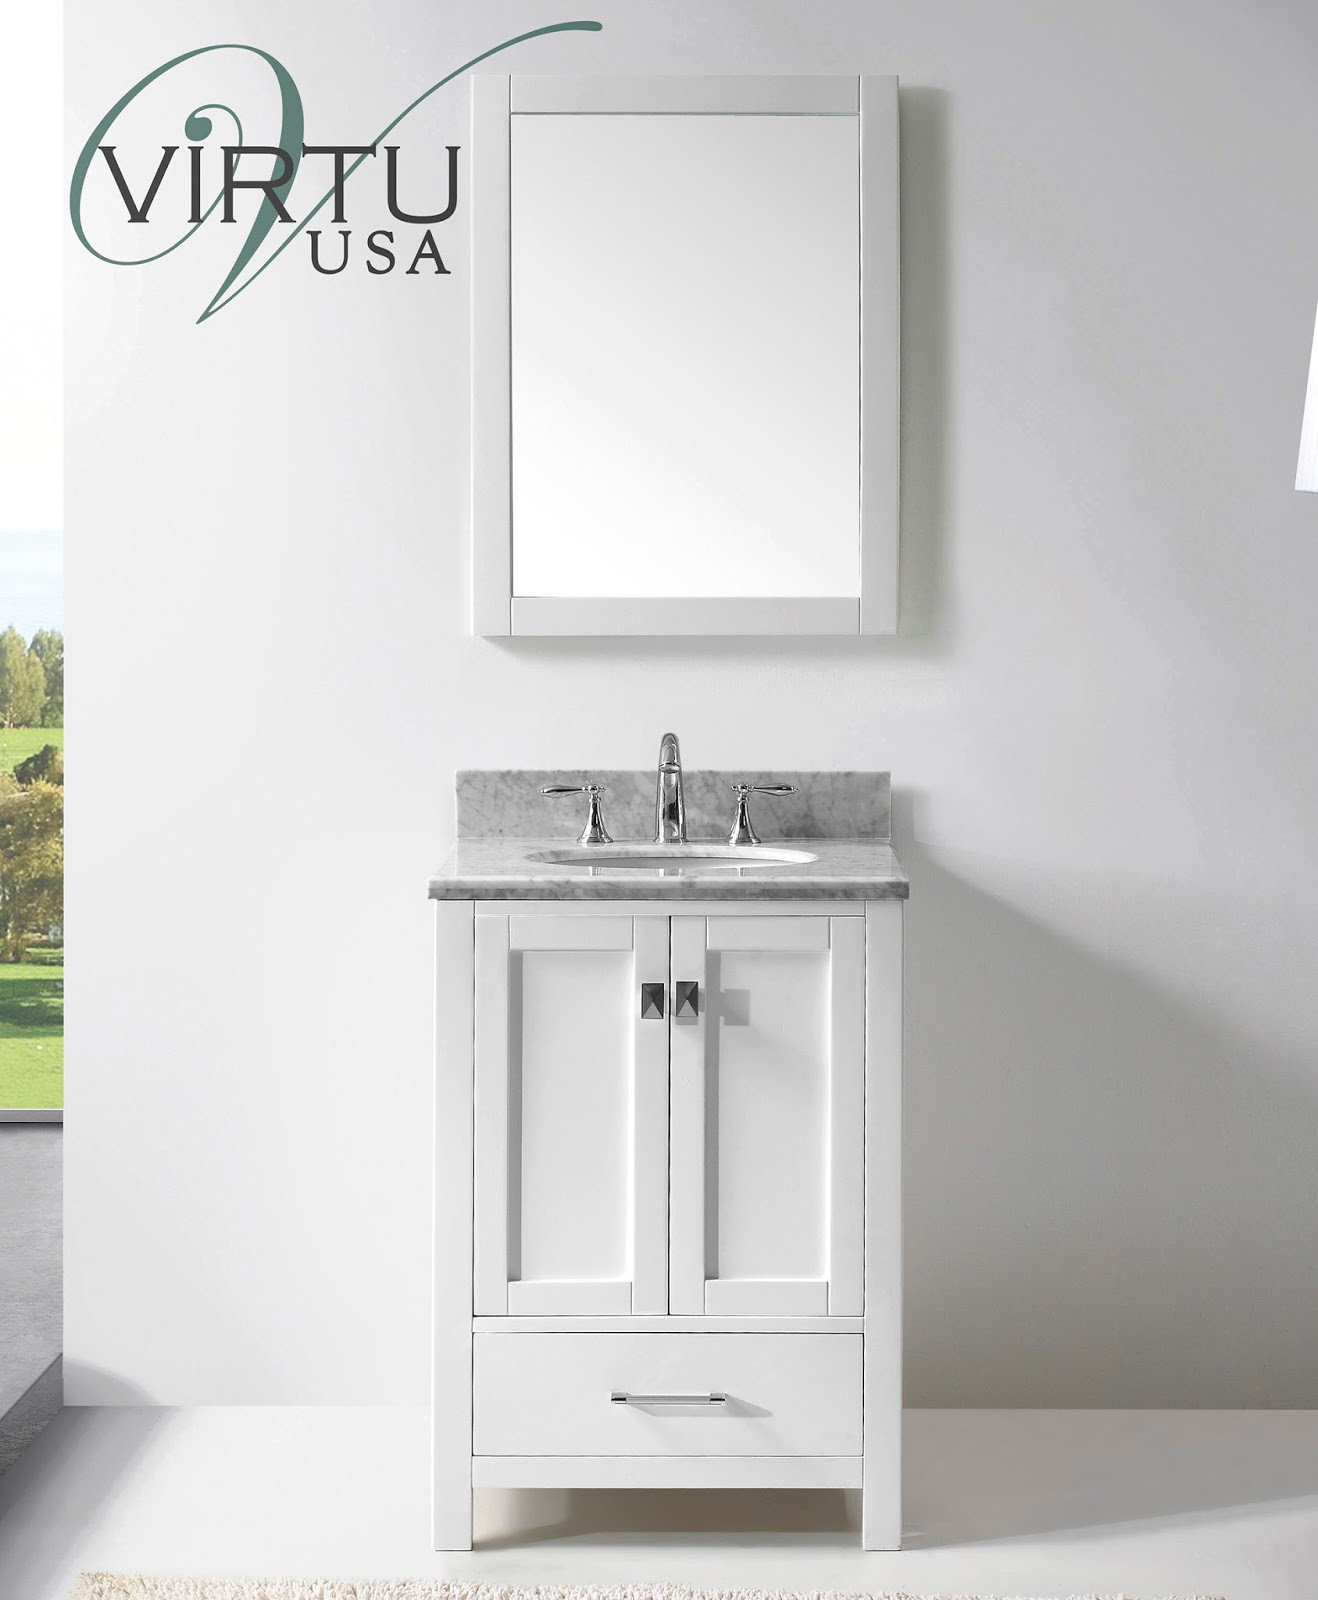 Bathroom Vanities Small Spaces
 Discount Bathroom Vanities Stylish Space with a Small